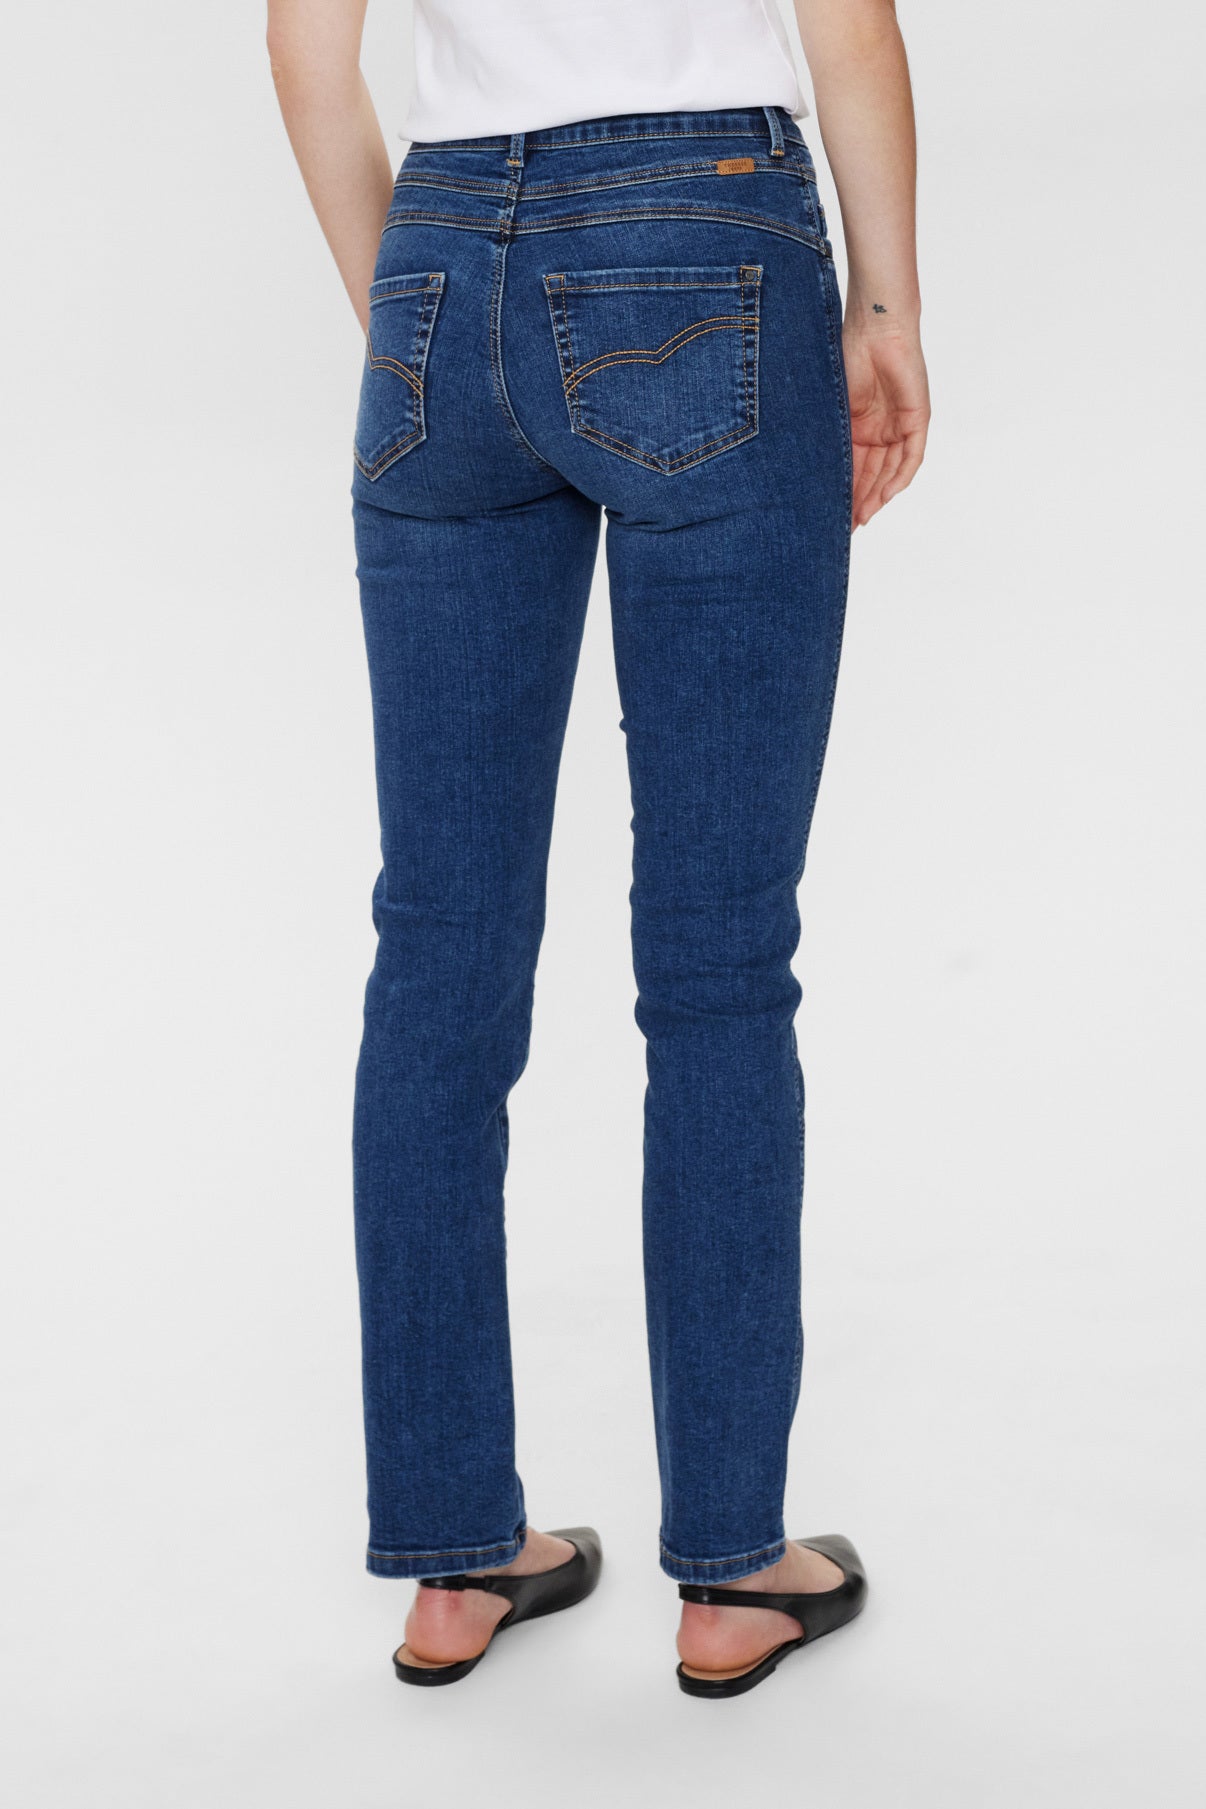 THERESE Jeans Maryann 7737